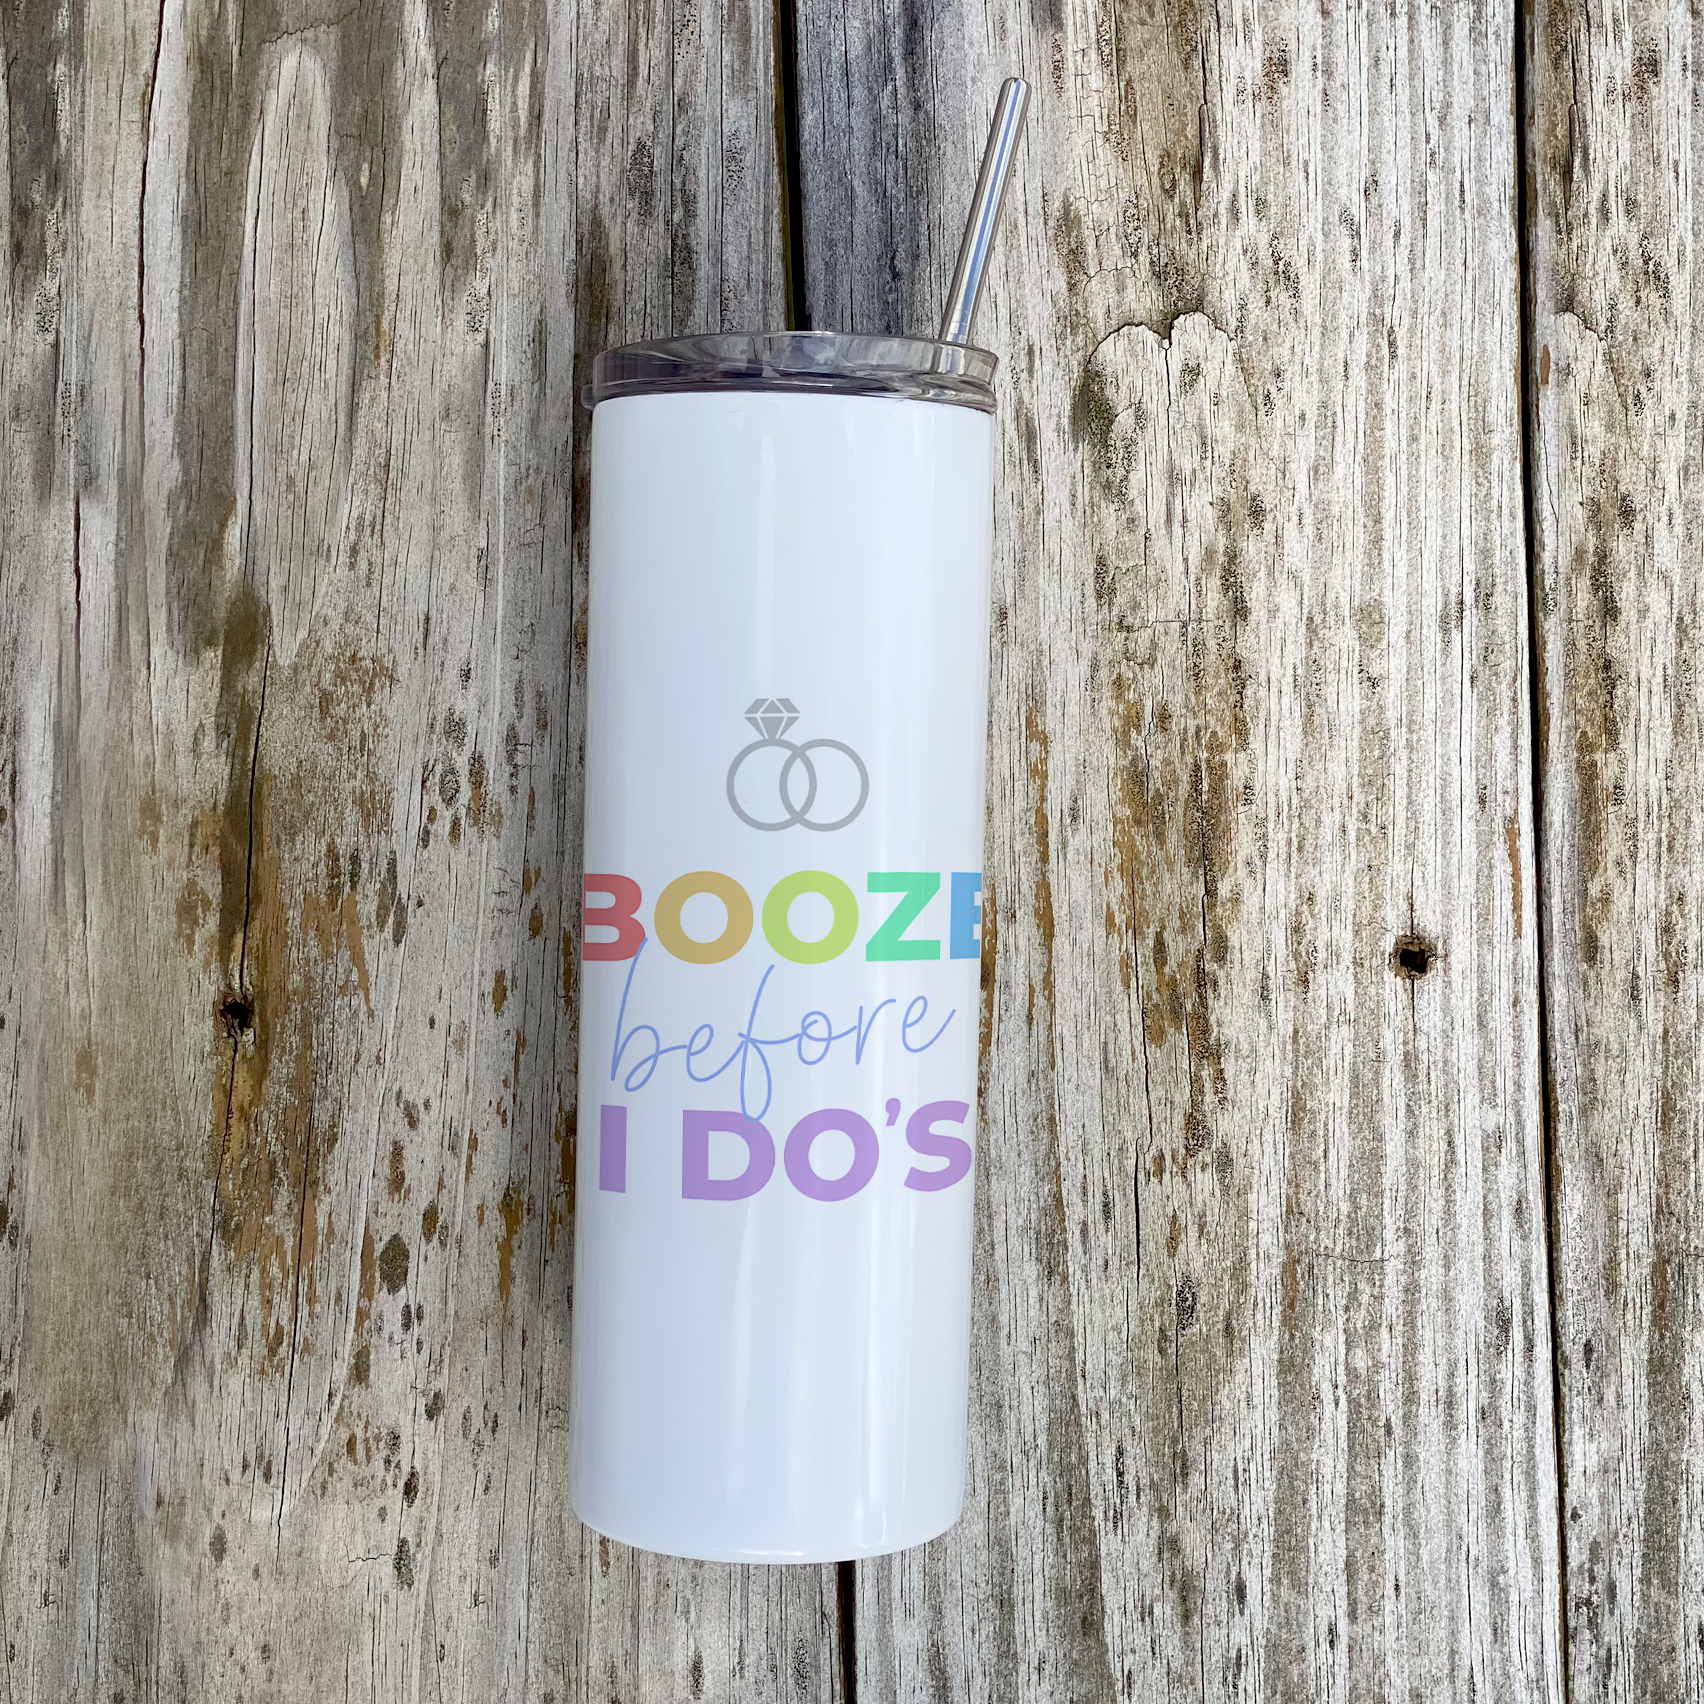 Bridal Party Collection (Booze Before I Dos) 20 Oz Stainless Steel Travel Tumbler with Straw